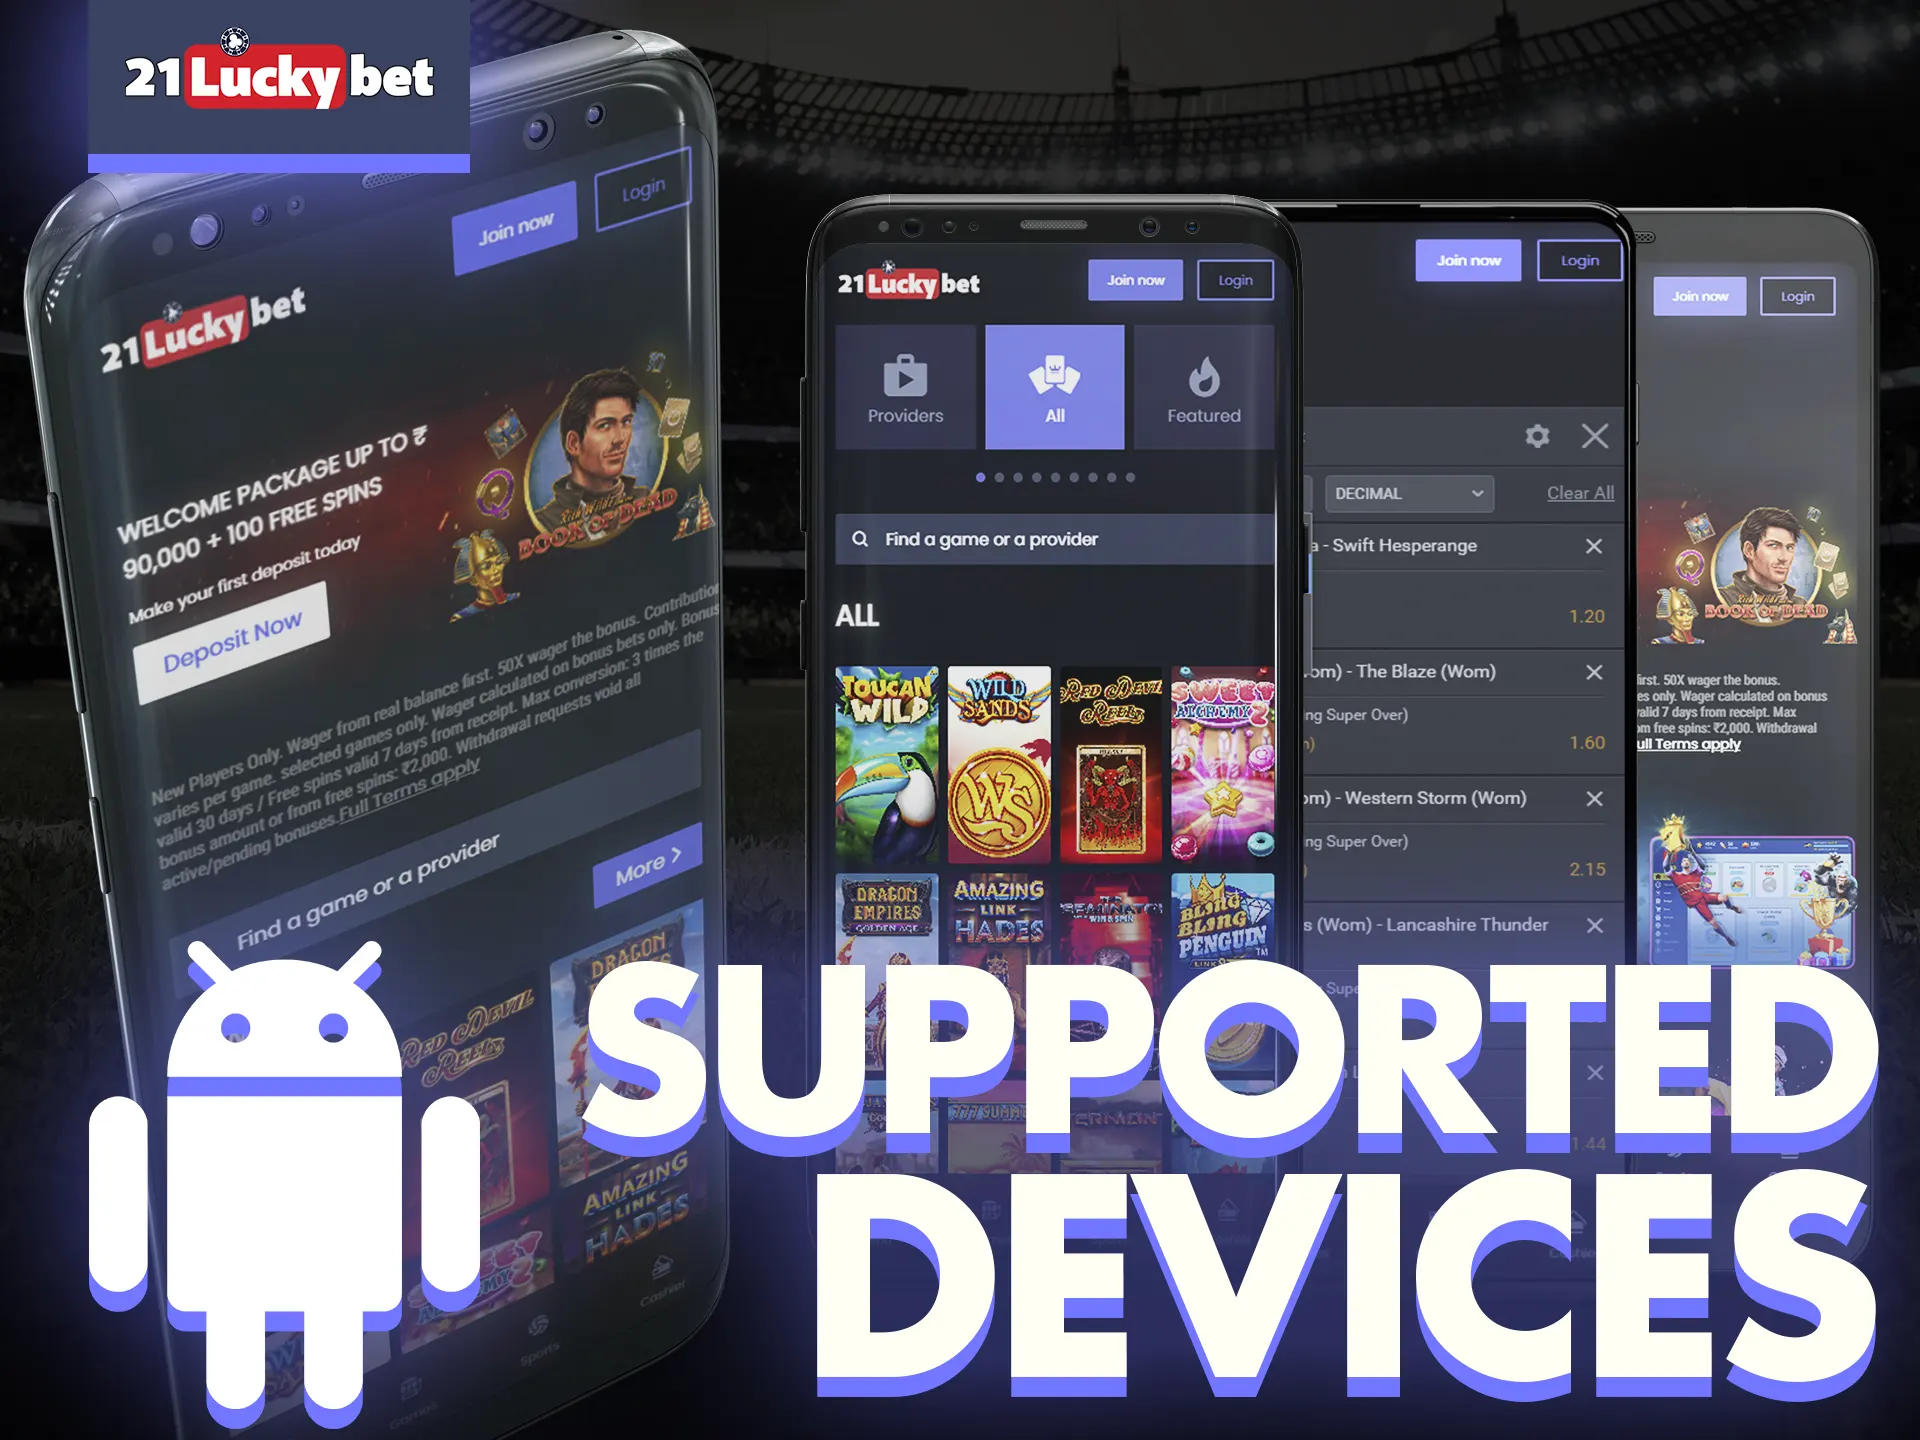 The 21luckybet app is supported on a wide variety of Android phone models.